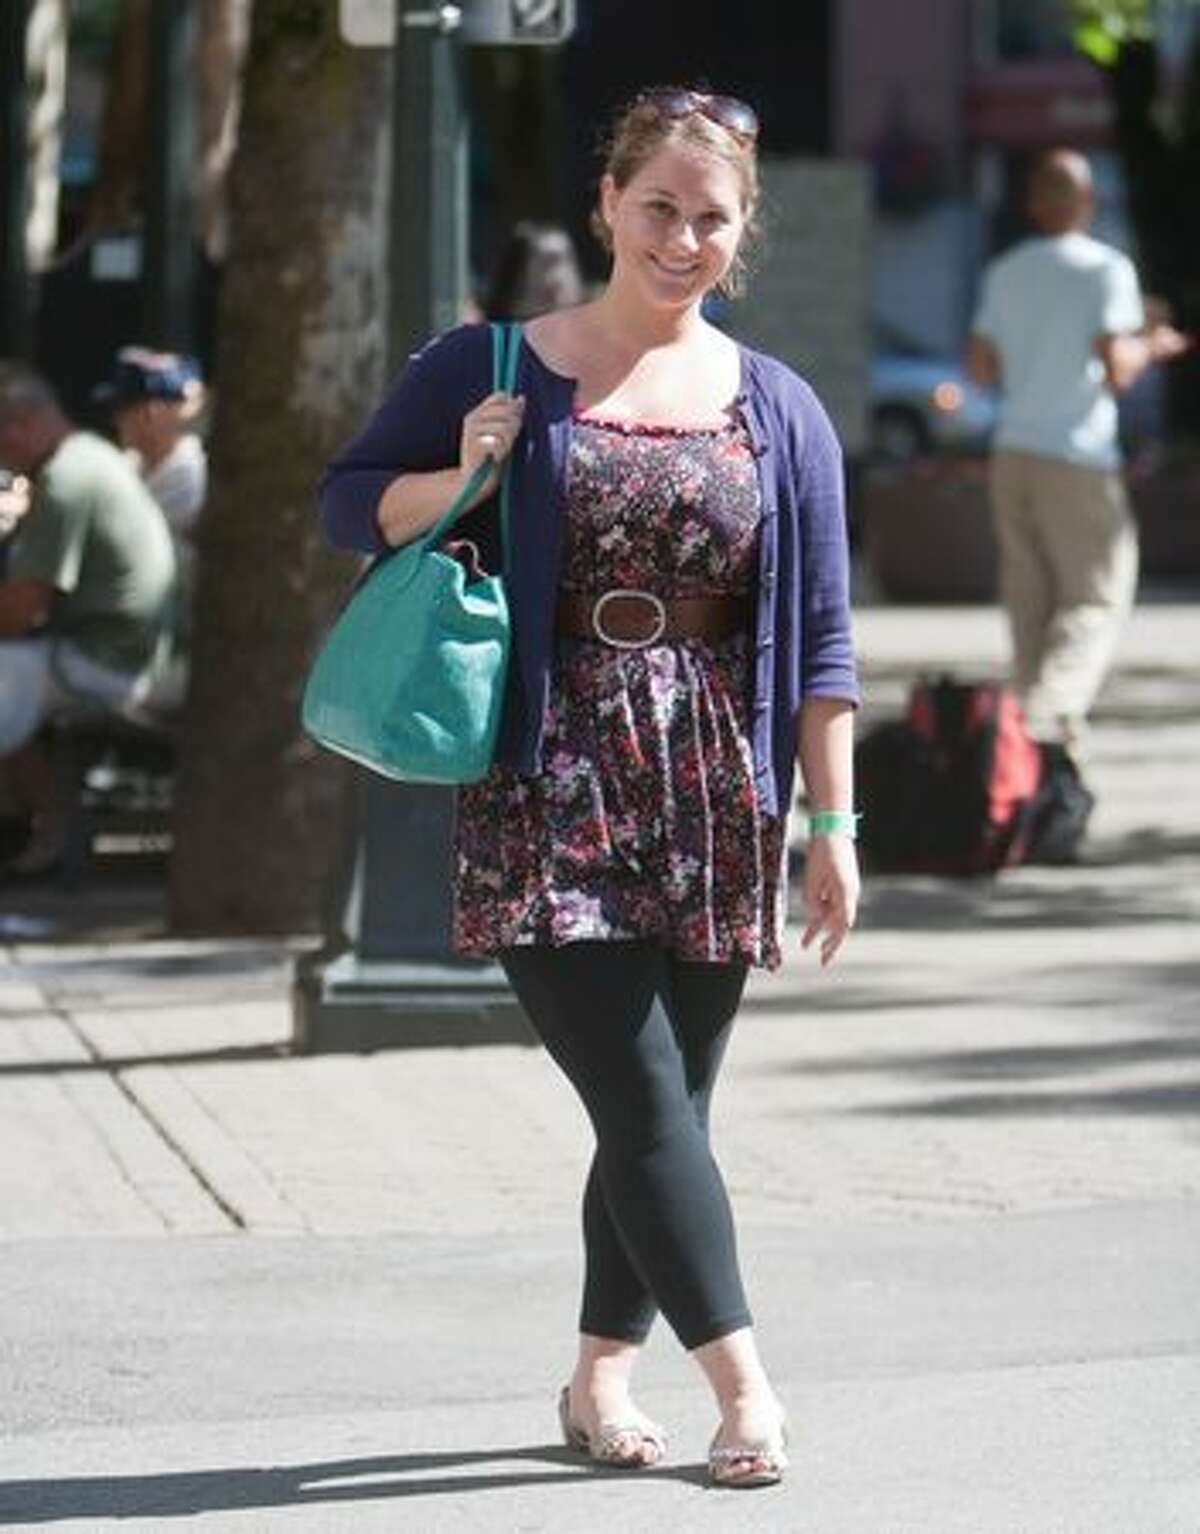 Rebekah Hess mixes it up with her layered look dressing her summer dress with a purple sweater. She completes her sassy summer look with a complimenting turquoise bag and silver slip-ons.